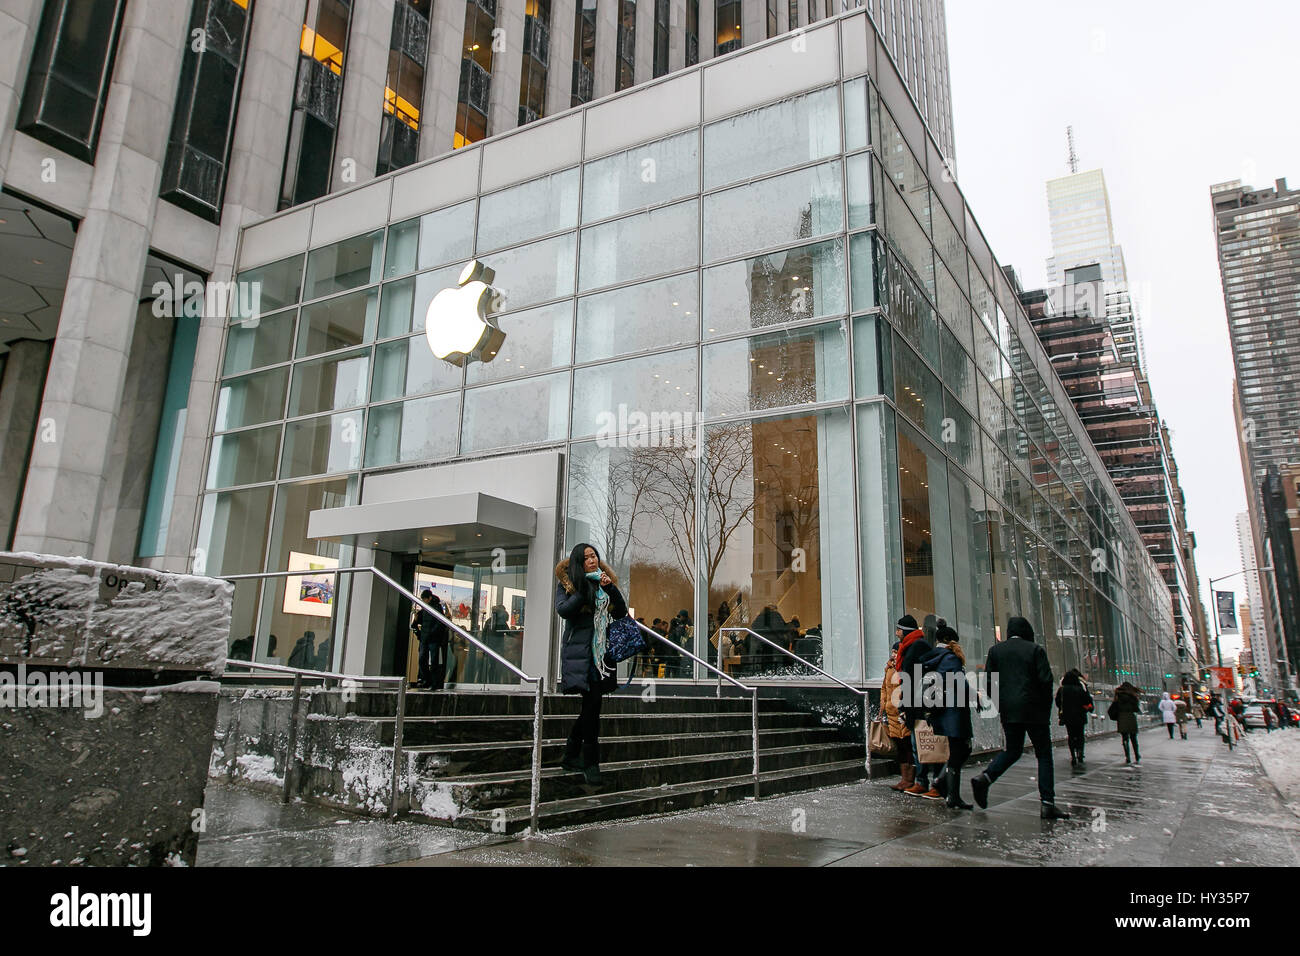 New York, Feburary 9, 2017: The front of the 5th Avenue Apple store's new location previously occupied by FAO Schwartz. Stock Photo